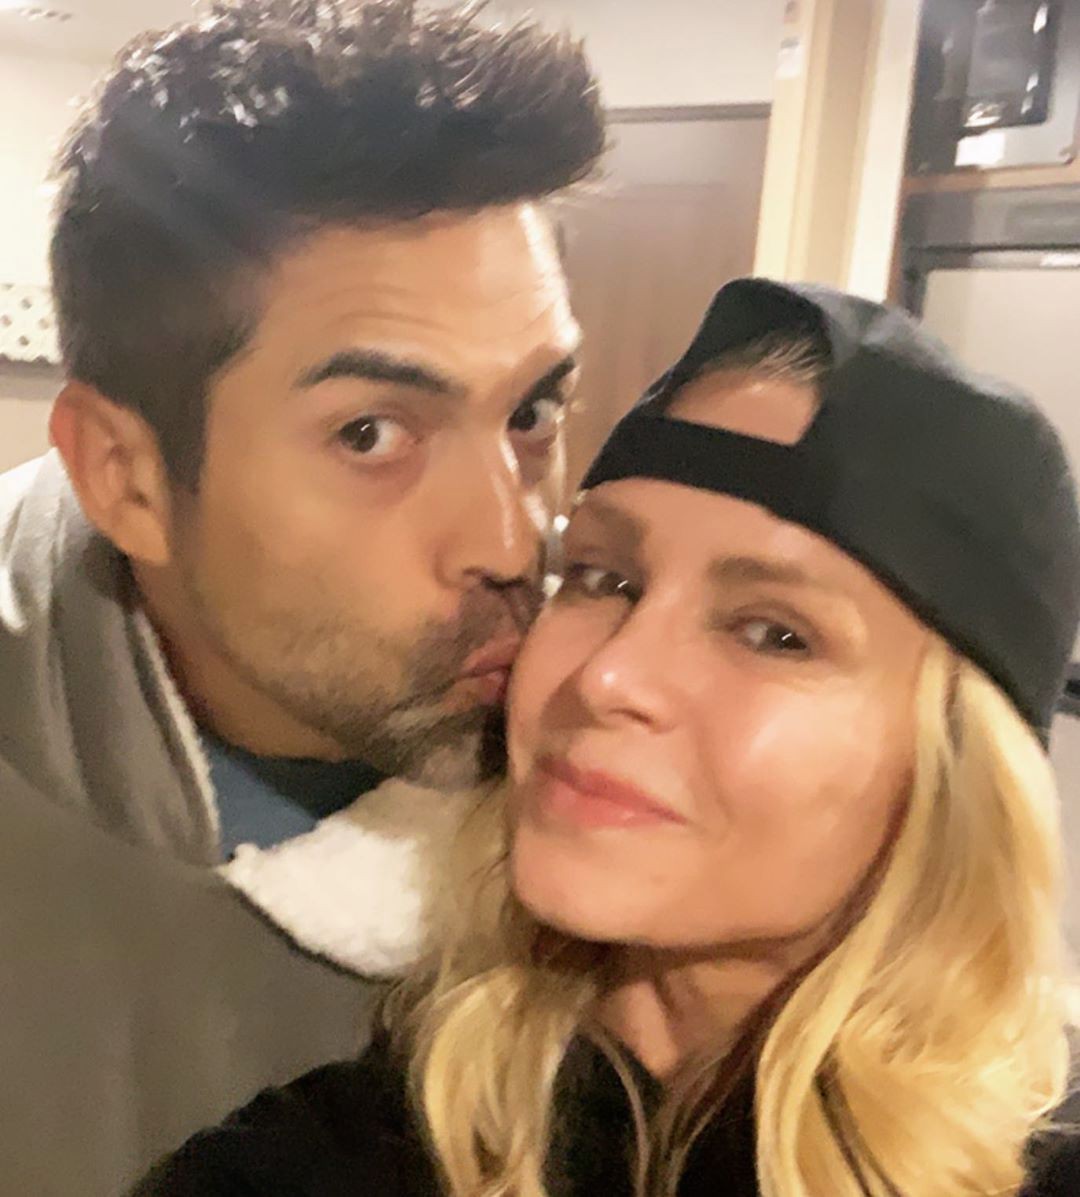 Meanwhile Tamra and Eddie took a road trip in an RV